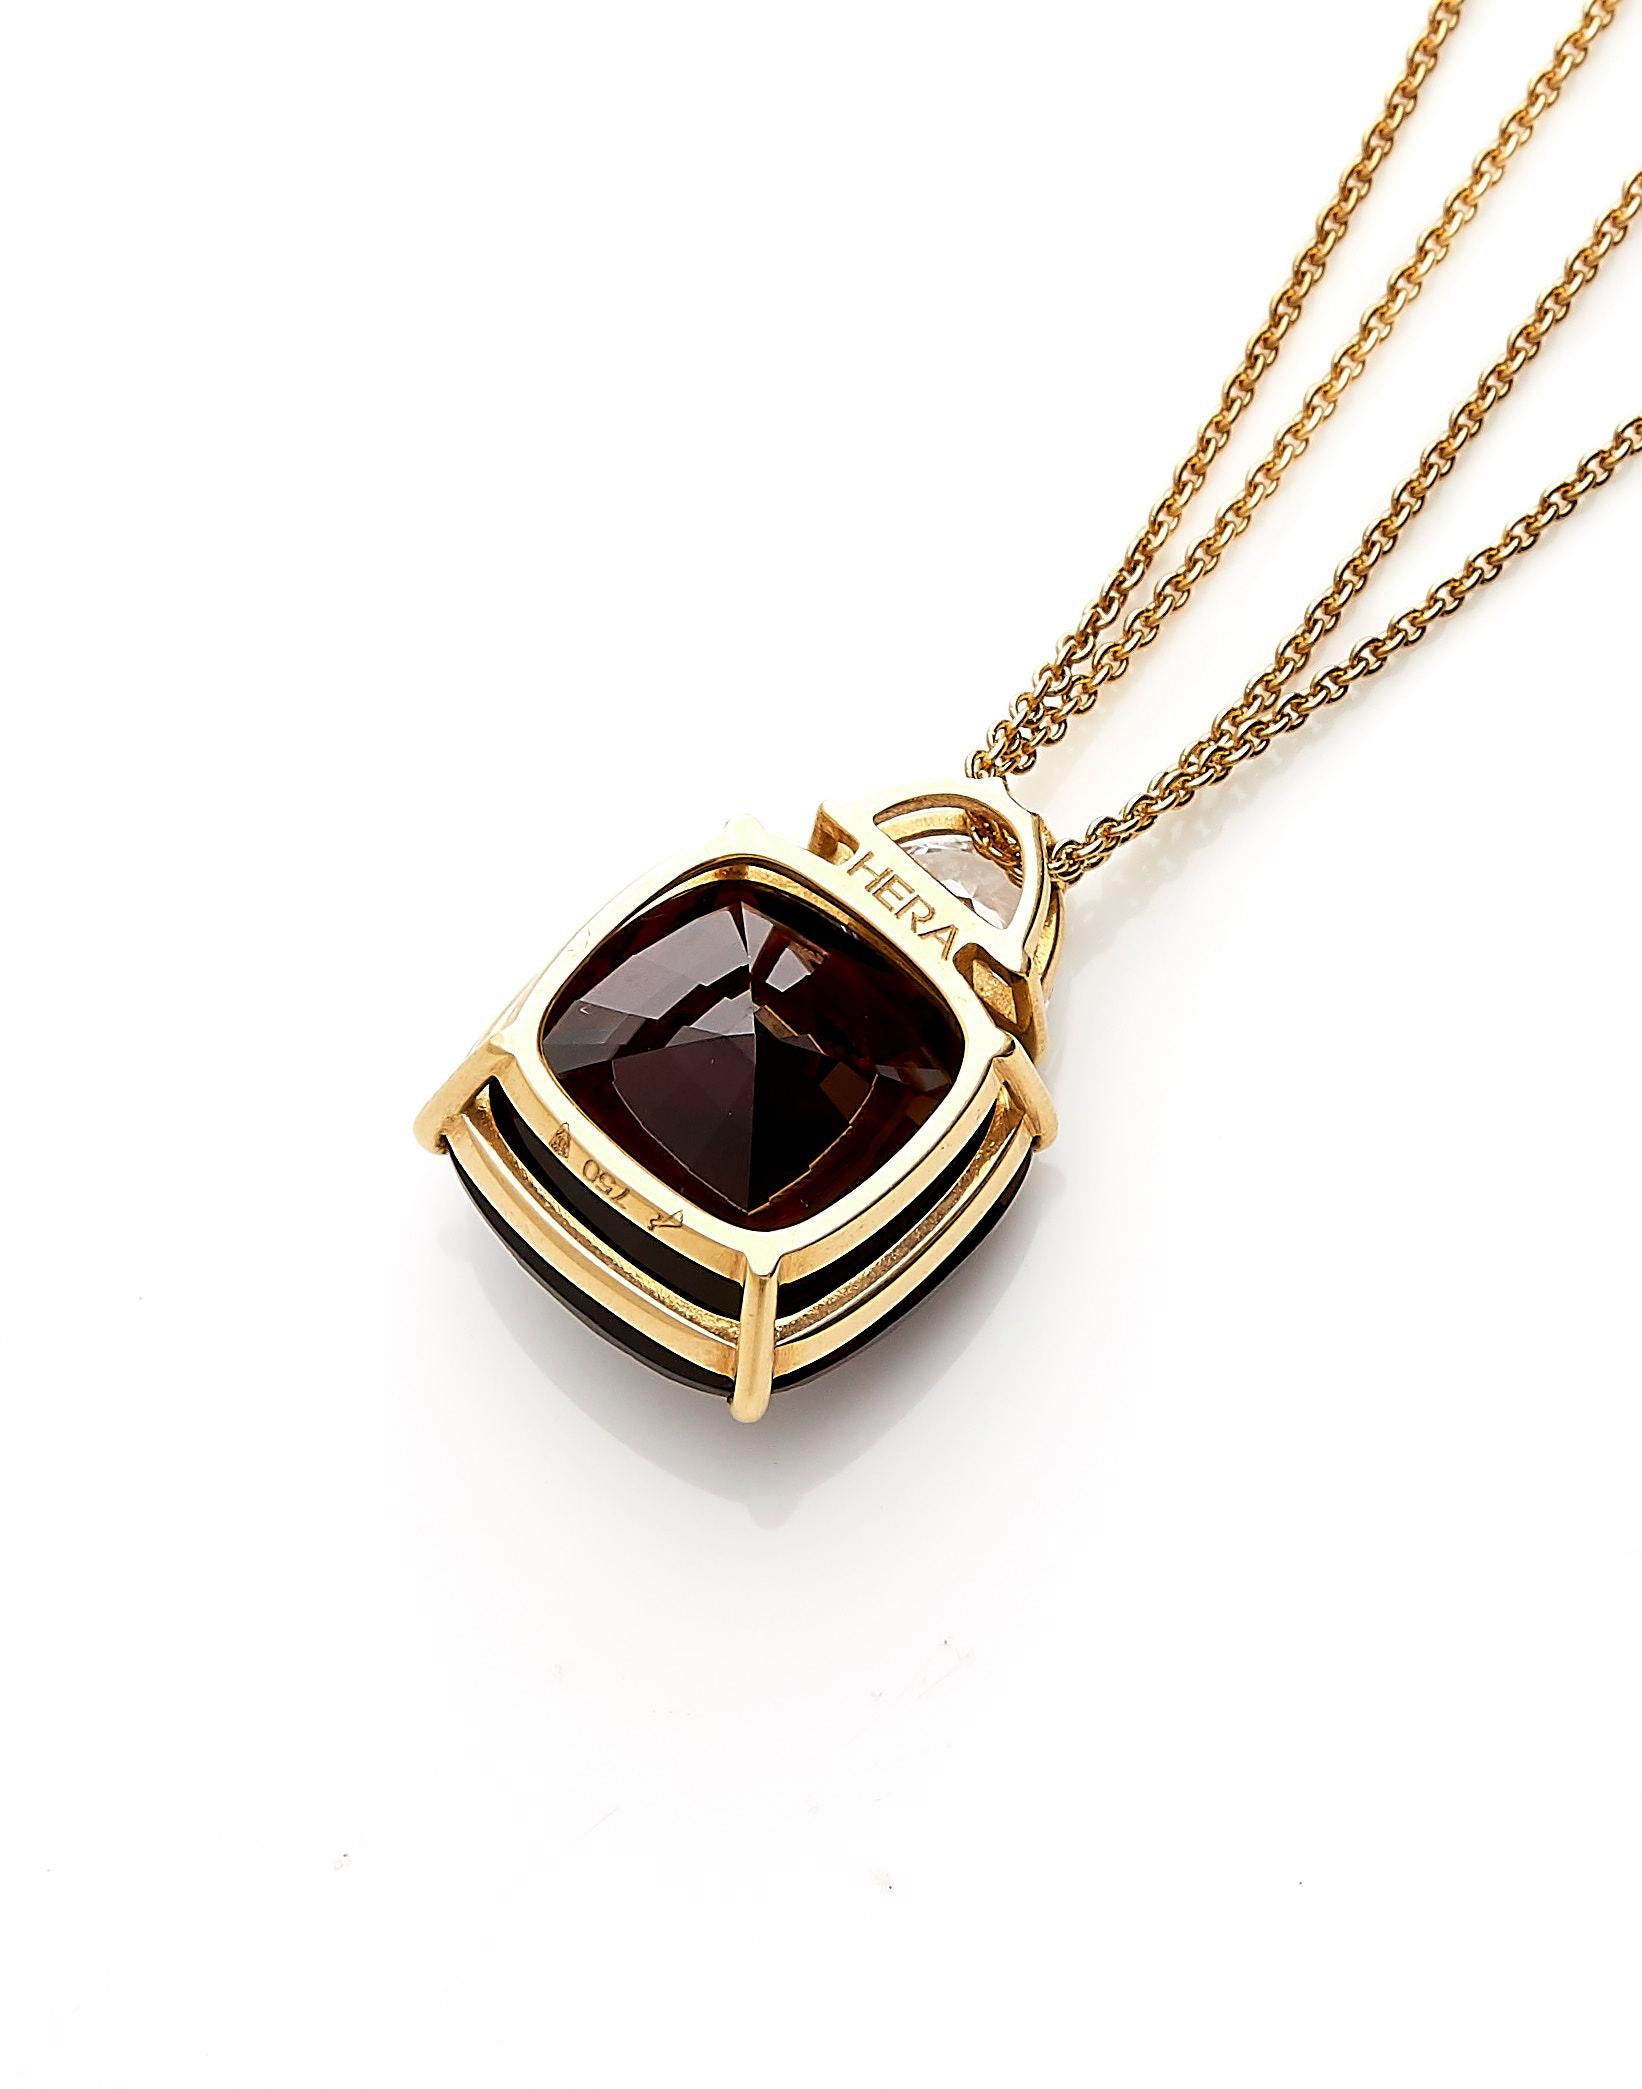 Antique Cushion Cut 18 Karat Yellow Gold Pendant Necklace with 13.86 Carat Red Garnet and Diamond For Sale